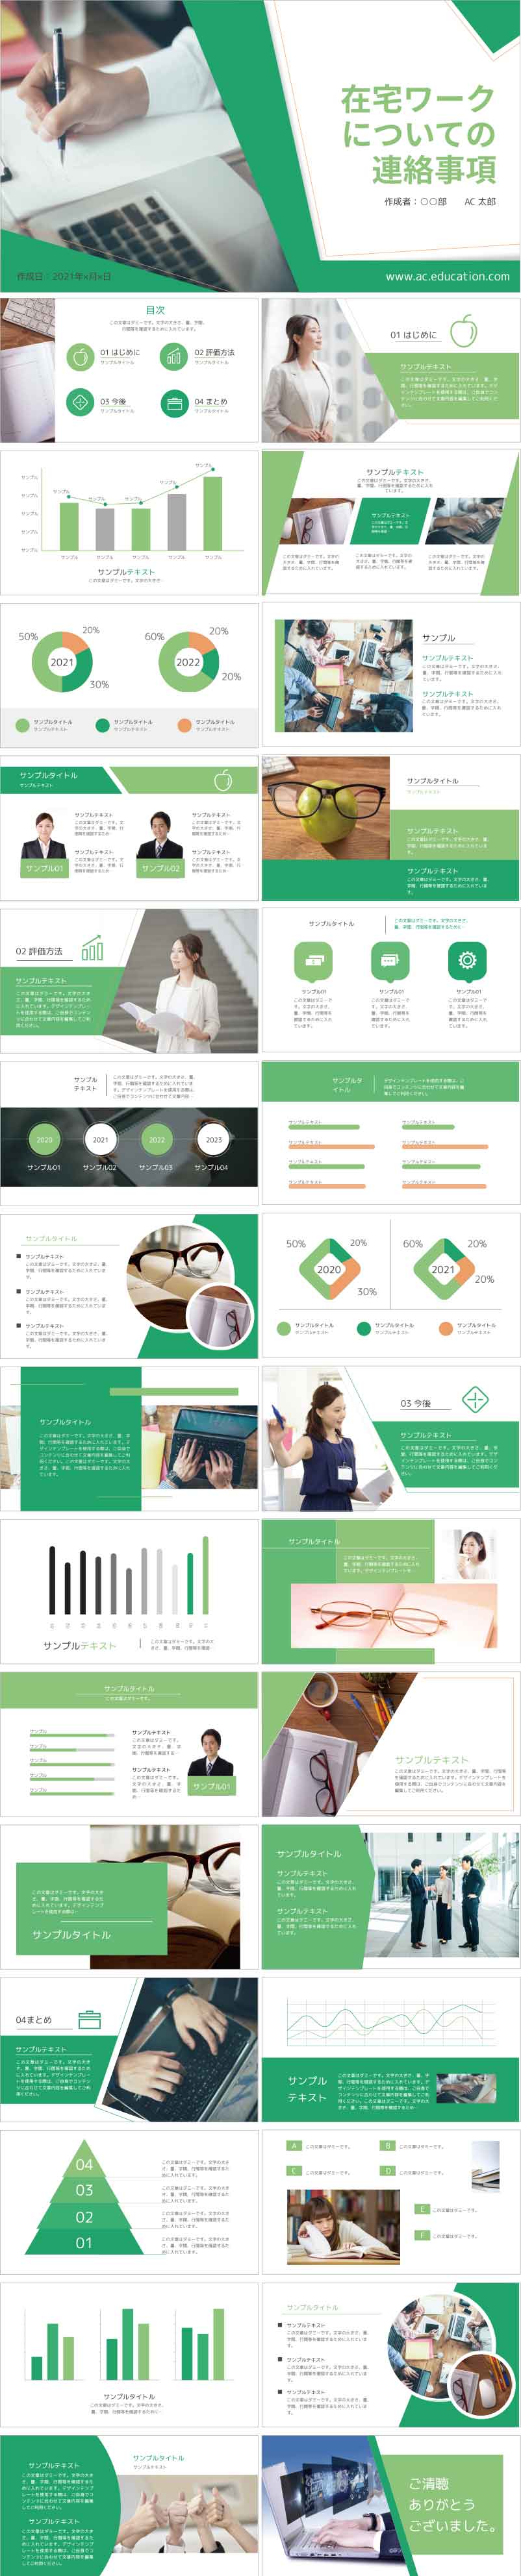 PowerPoint template vol.84